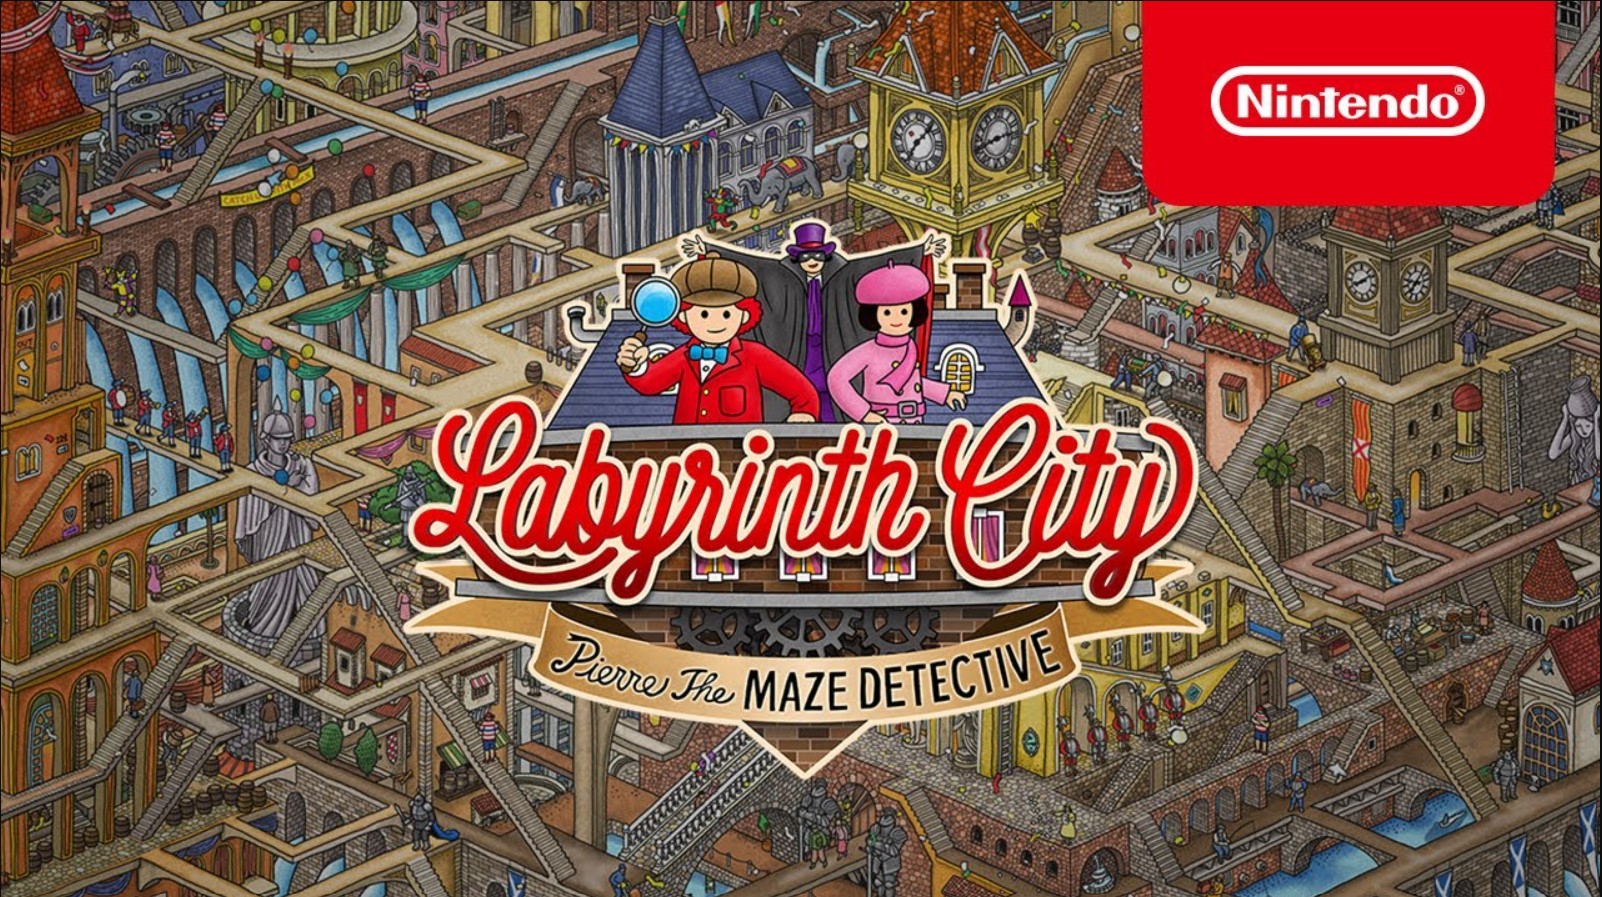 Labyrinth City Pierre the Maze Detective iPhone ios Version Full Game Free Download